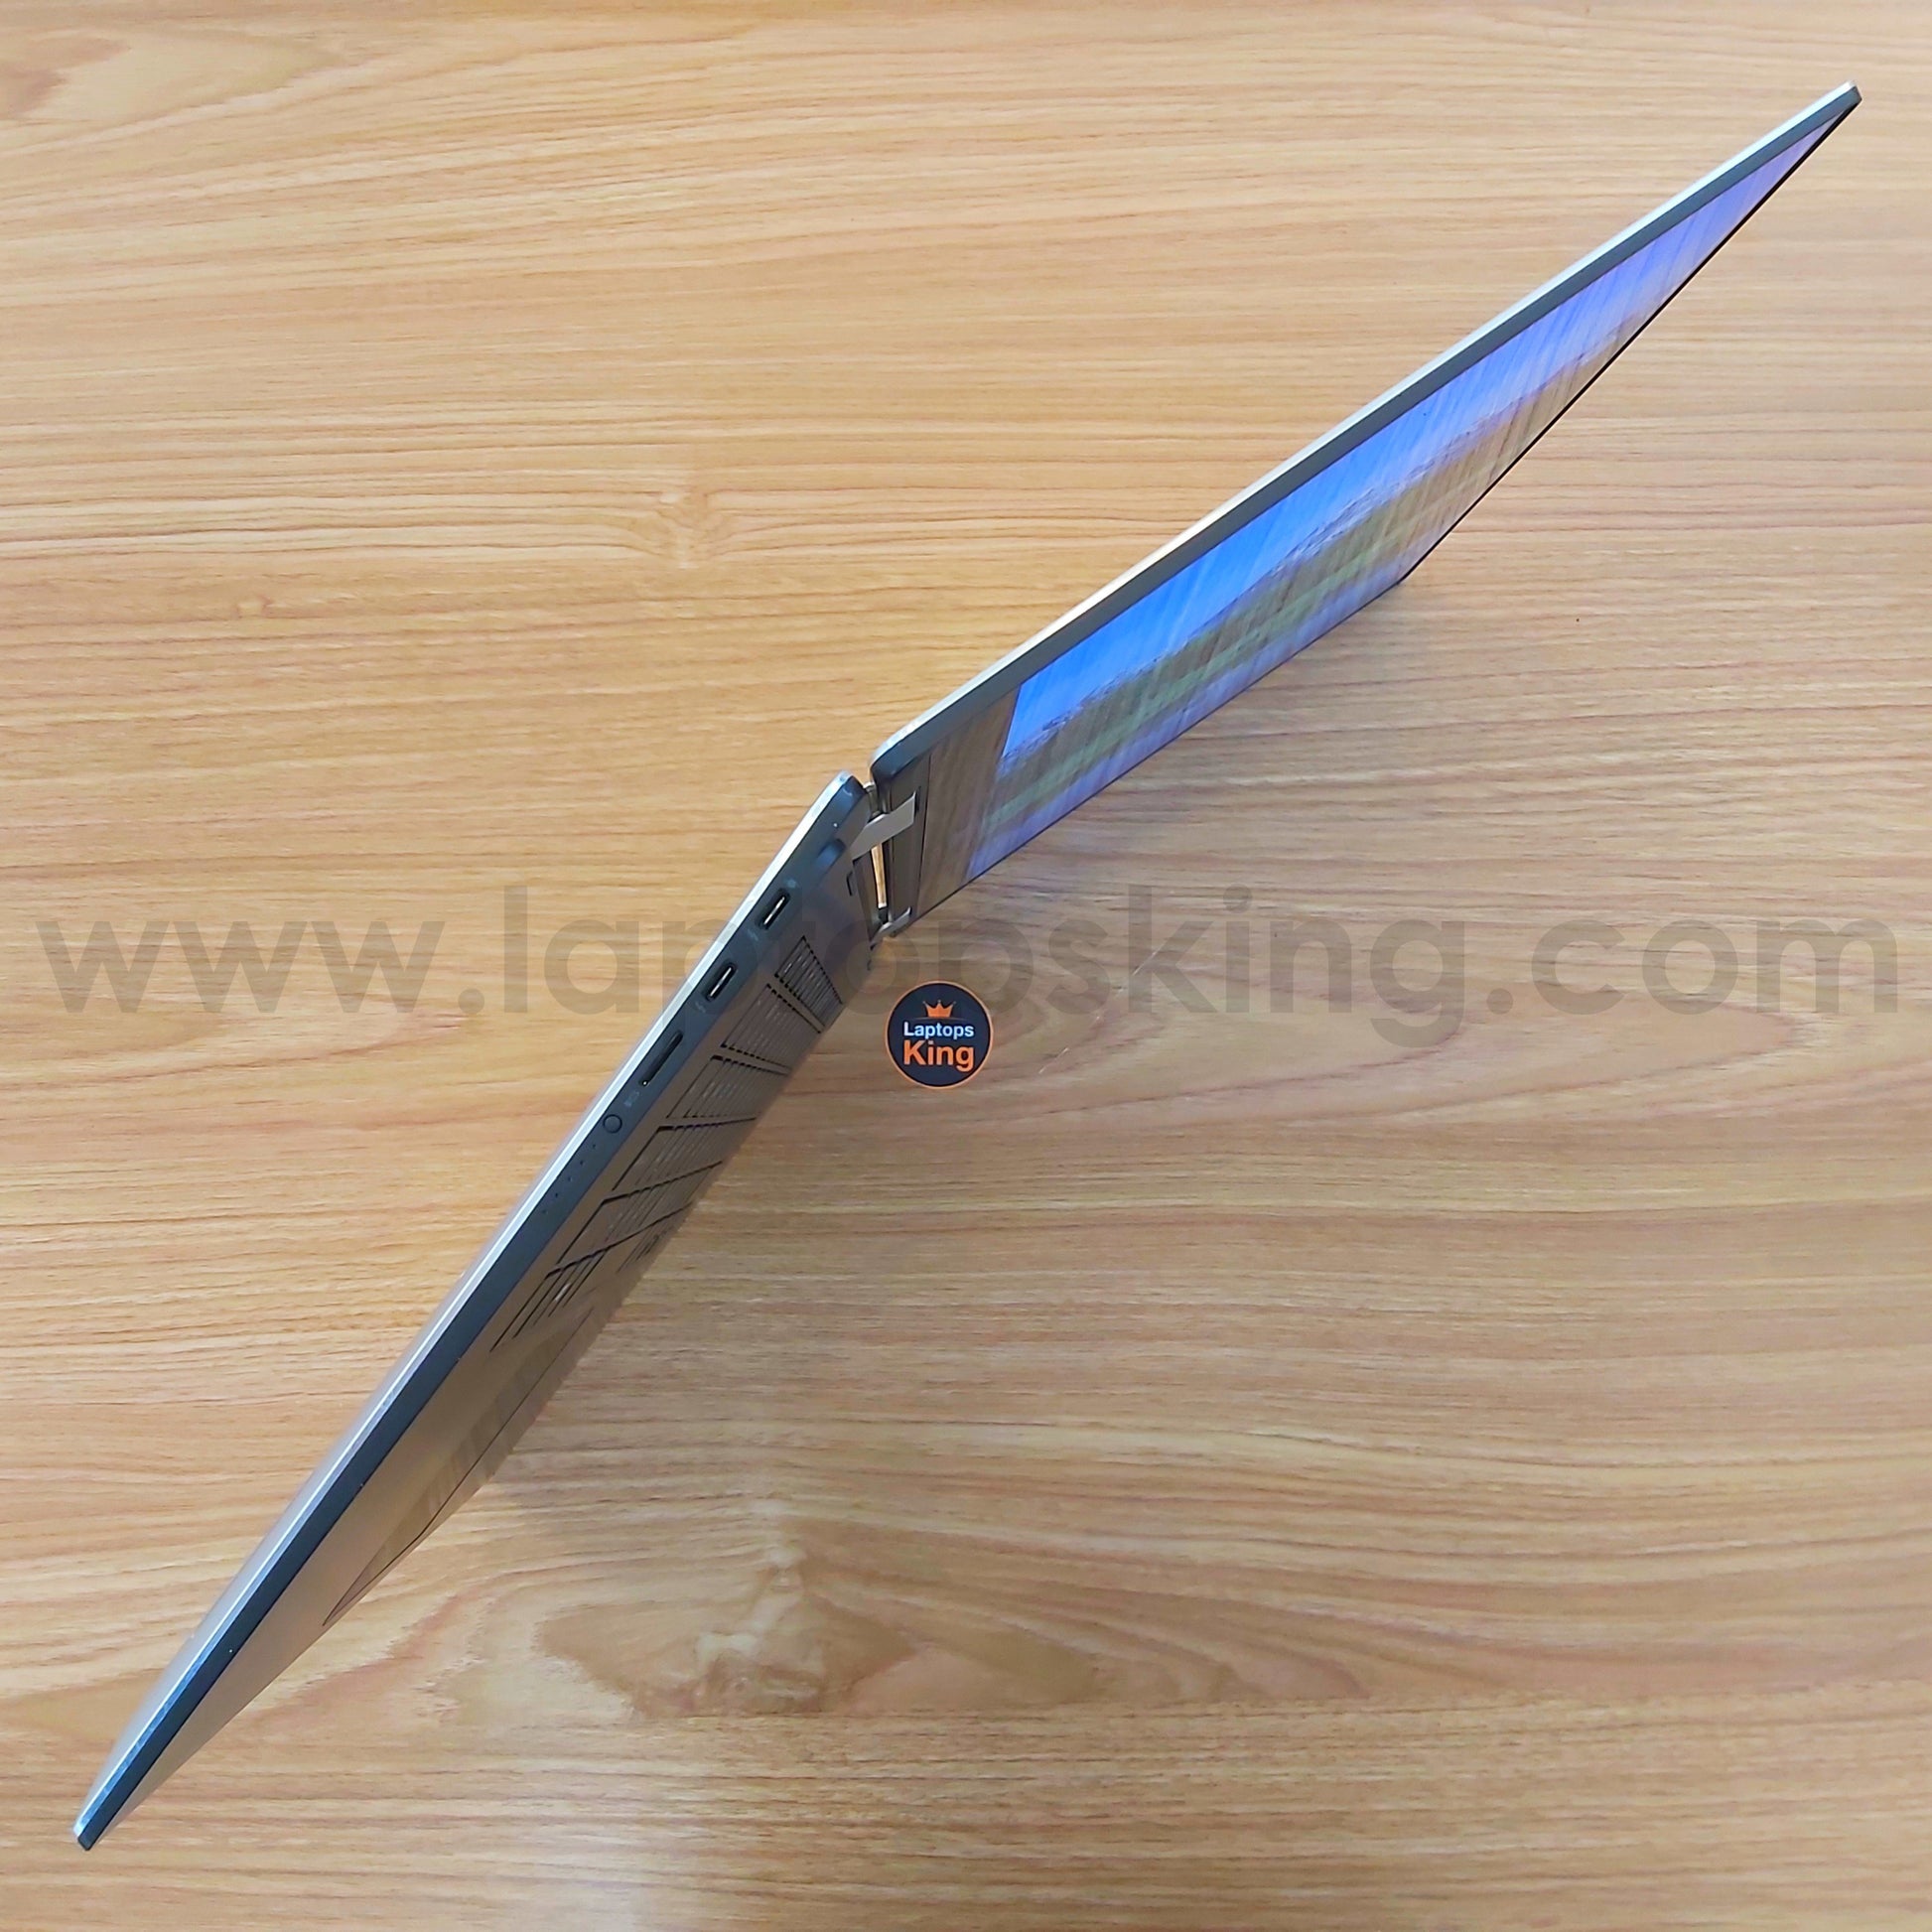 Dell XPS 15 9575 2in1 15.6" i7-8705G RX Vega 4gb Laptop (Used Very Clean) Computer for sale Lebanon, laptop in Lebanon, laptop for sale Lebanon, best programming laptop, laptop for sale in Lebanon, laptops for sale in Lebanon, laptop for sale in Lebanon, buy computer Lebanon, buy laptop Lebanon.